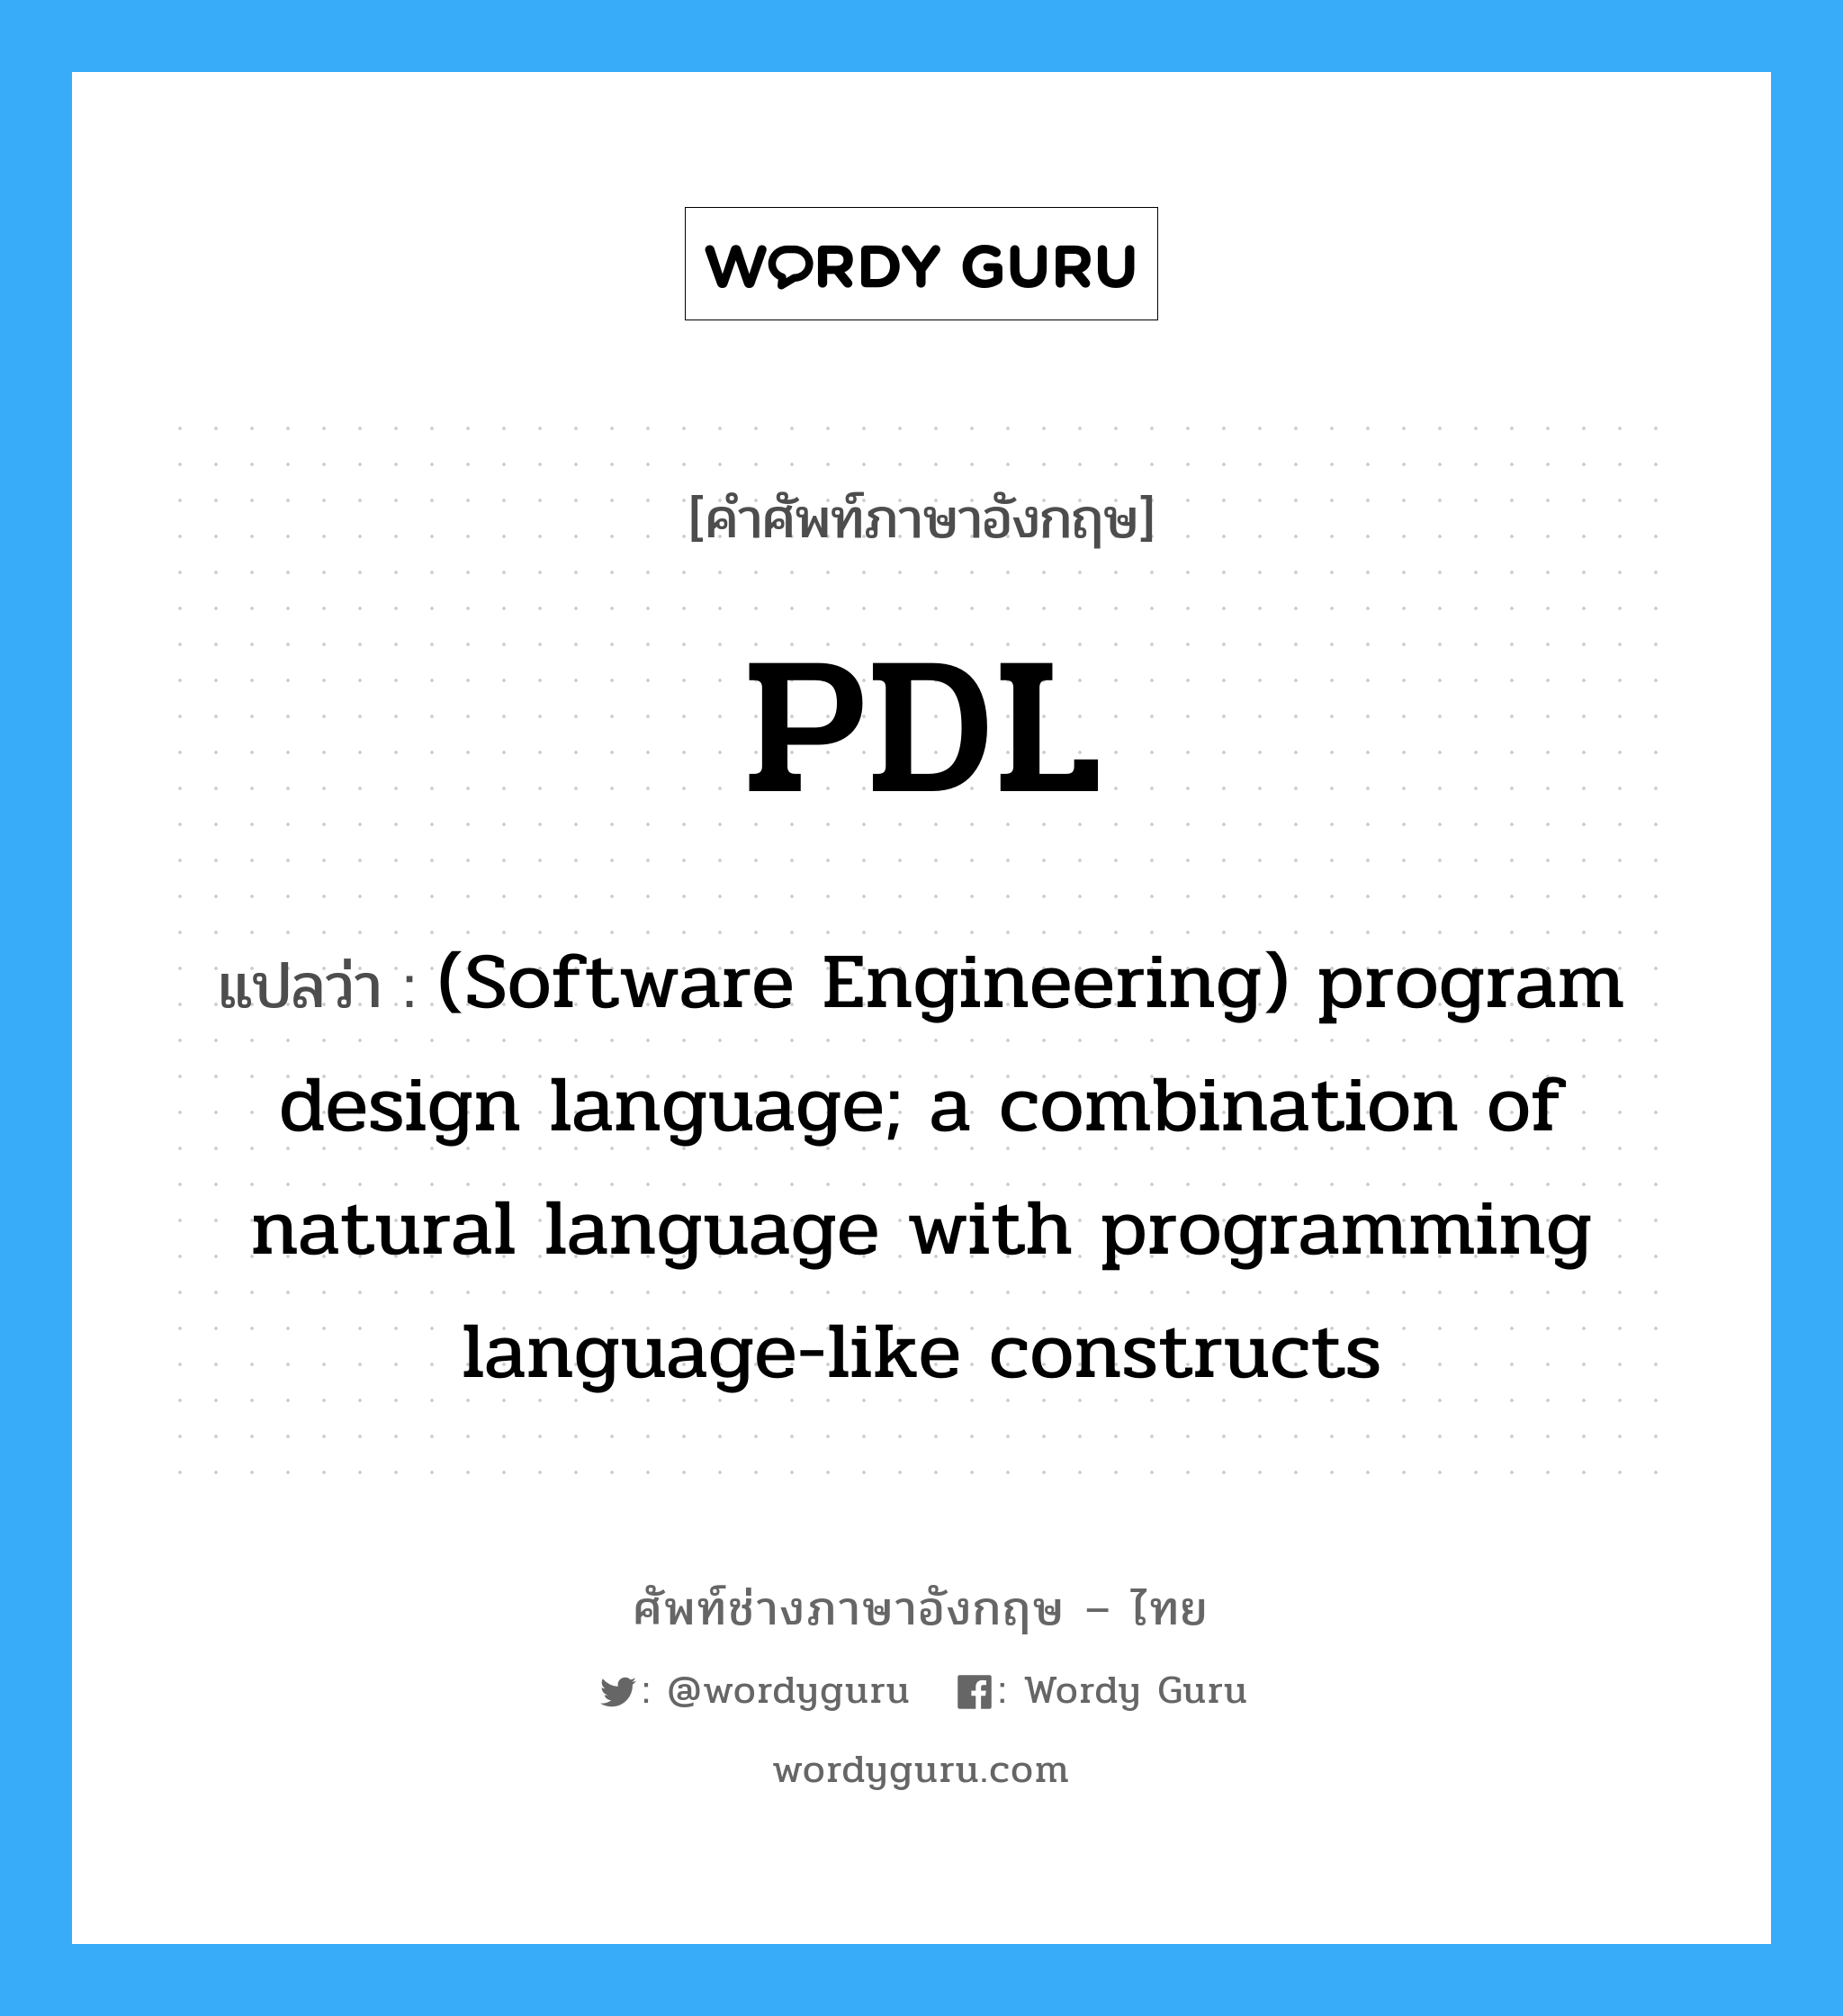 (Software Engineering) program design language; a combination of natural language with programming language-like constructs ภาษาอังกฤษ?, คำศัพท์ช่างภาษาอังกฤษ - ไทย (Software Engineering) program design language; a combination of natural language with programming language-like constructs คำศัพท์ภาษาอังกฤษ (Software Engineering) program design language; a combination of natural language with programming language-like constructs แปลว่า PDL